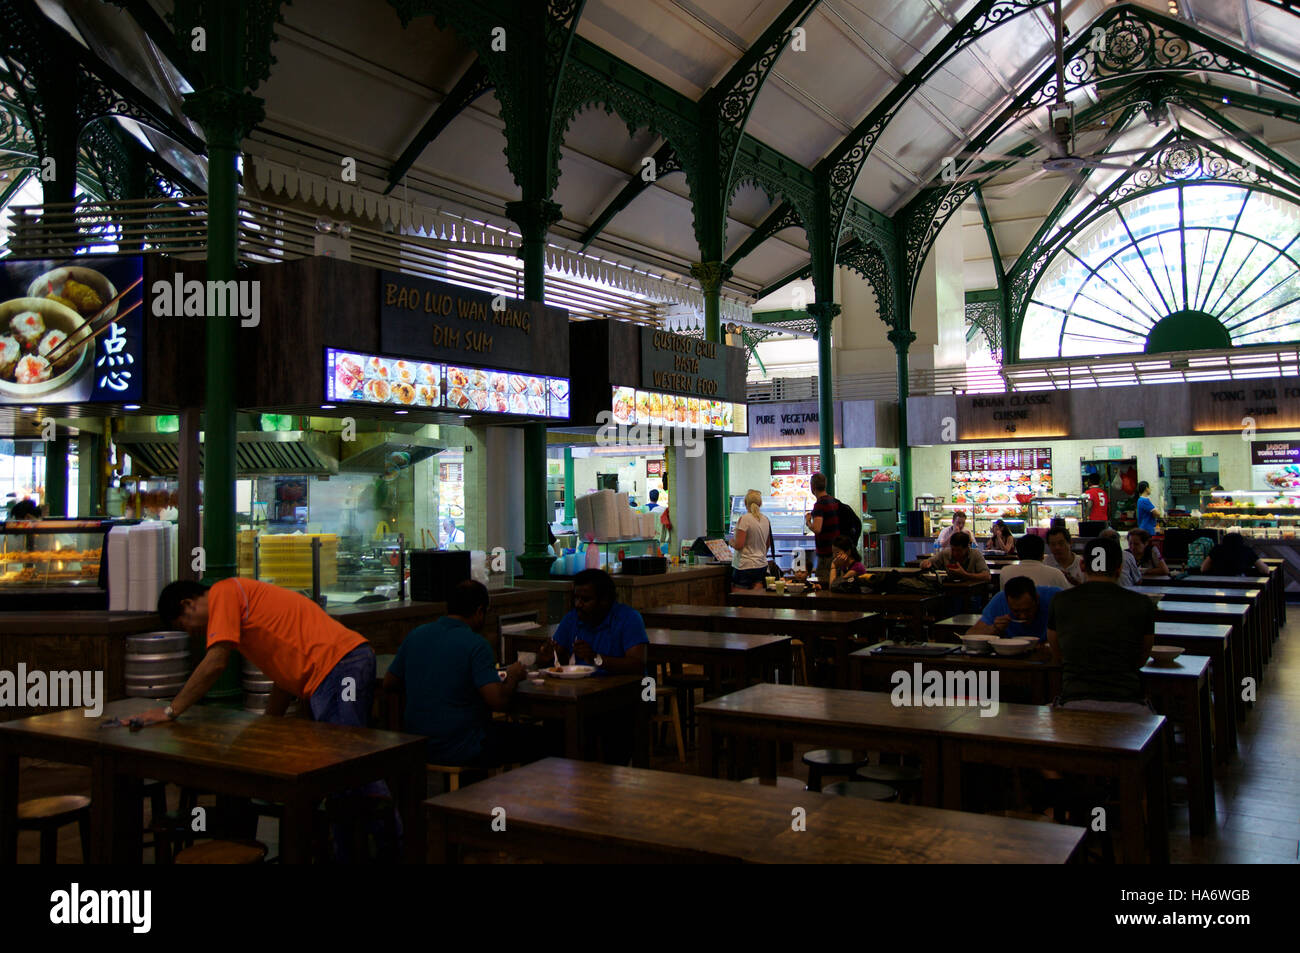 SINGAPORE - JULY 23rd, 2016: Lau Pa Sat Festival Market was formerly known as Telok Ayer - now it is a popular catering place and national historic landmark Stock Photo